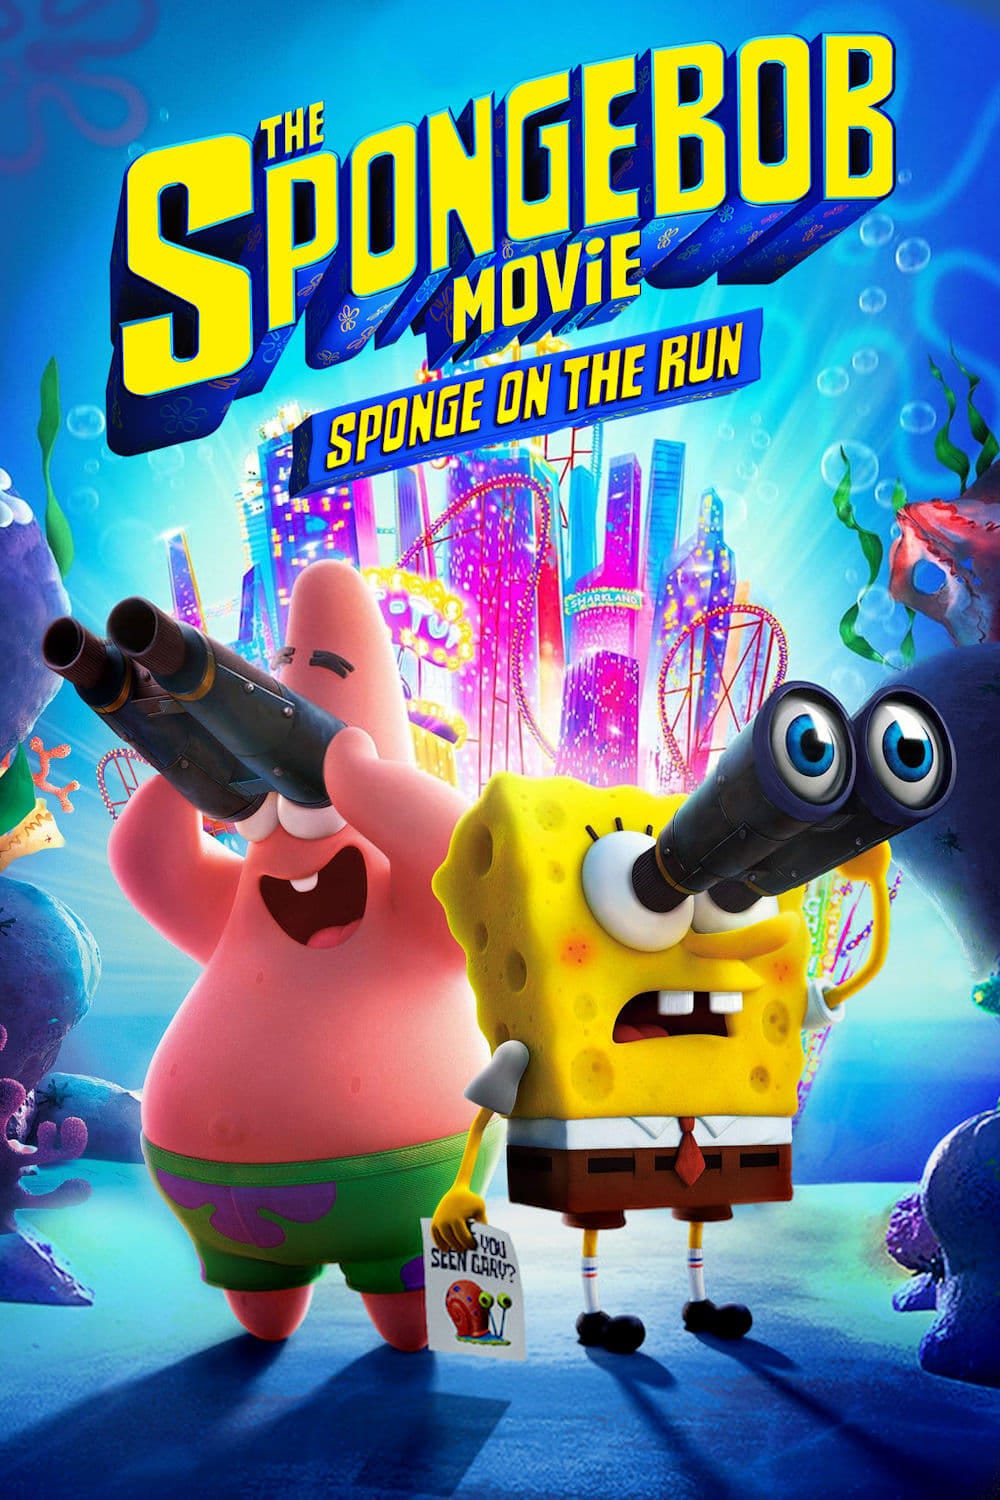 17 HQ Photos Spongebob Movie 2020 Release Date / Viacomcbs Ceo Doesn T Rule Out Direct To Vod Release For Upcoming Spongebob Movie